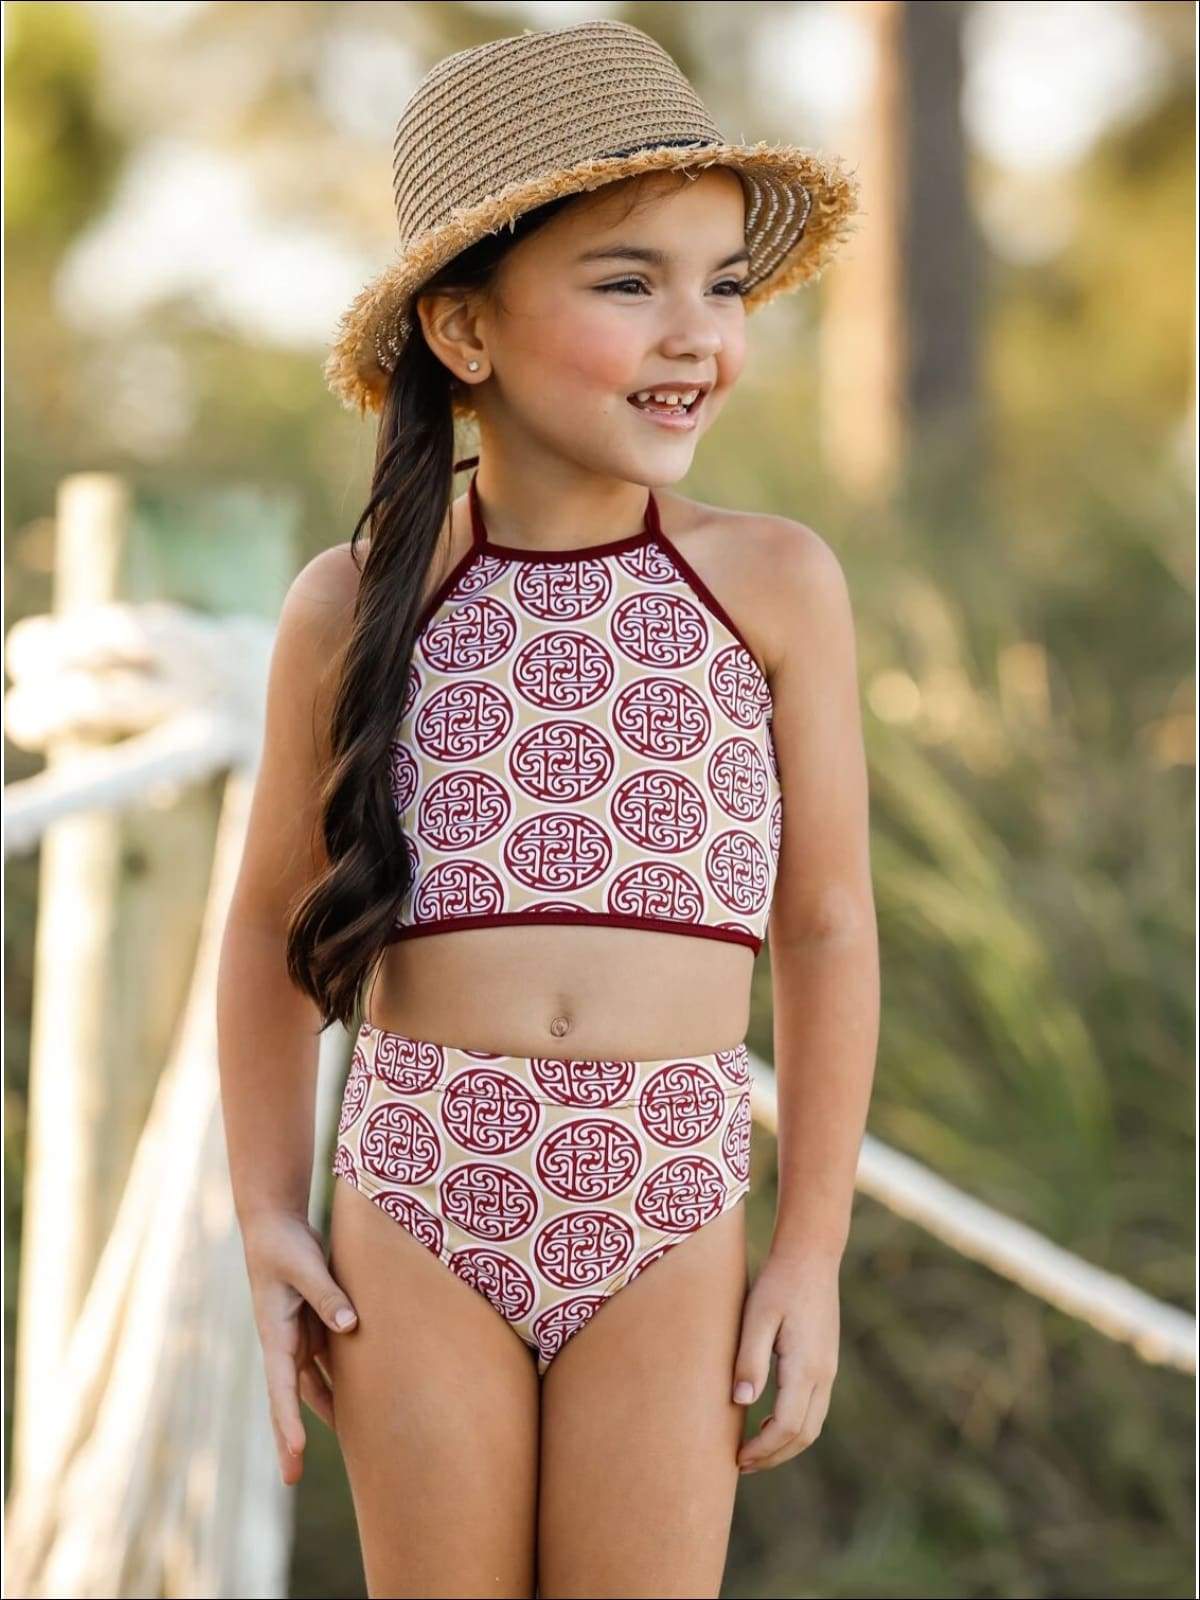 https://cdn.shopify.com/s/files/1/0996/1812/products/girls-halter-medallion-high-waist-two-piece-swimsuit-20-39-99-40-59-10y12y-2t3t-4t5y-mia-belle-baby-439.jpg